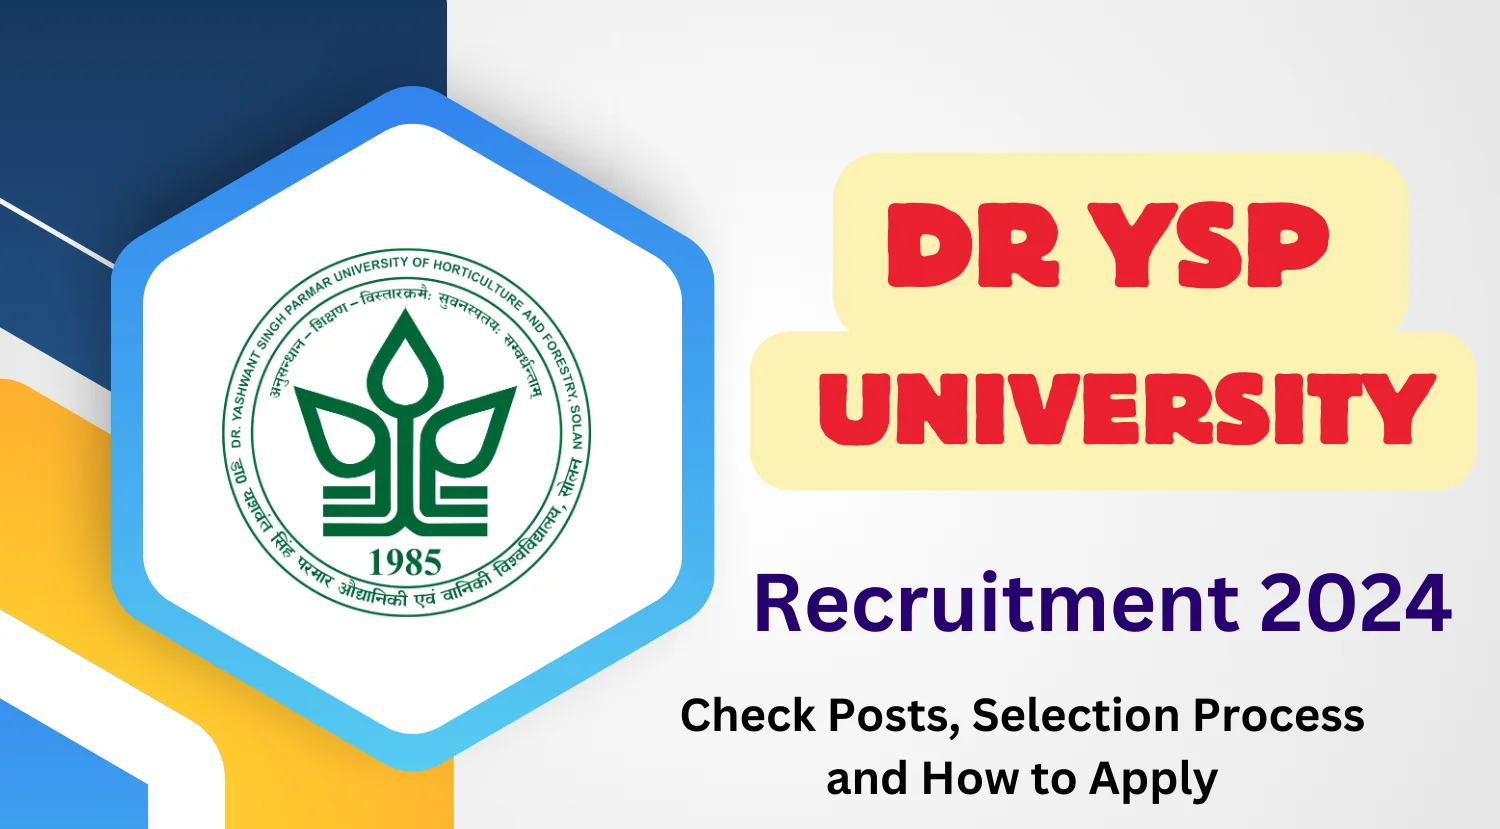 Dr YSP University Young Professional Recruitment 2024